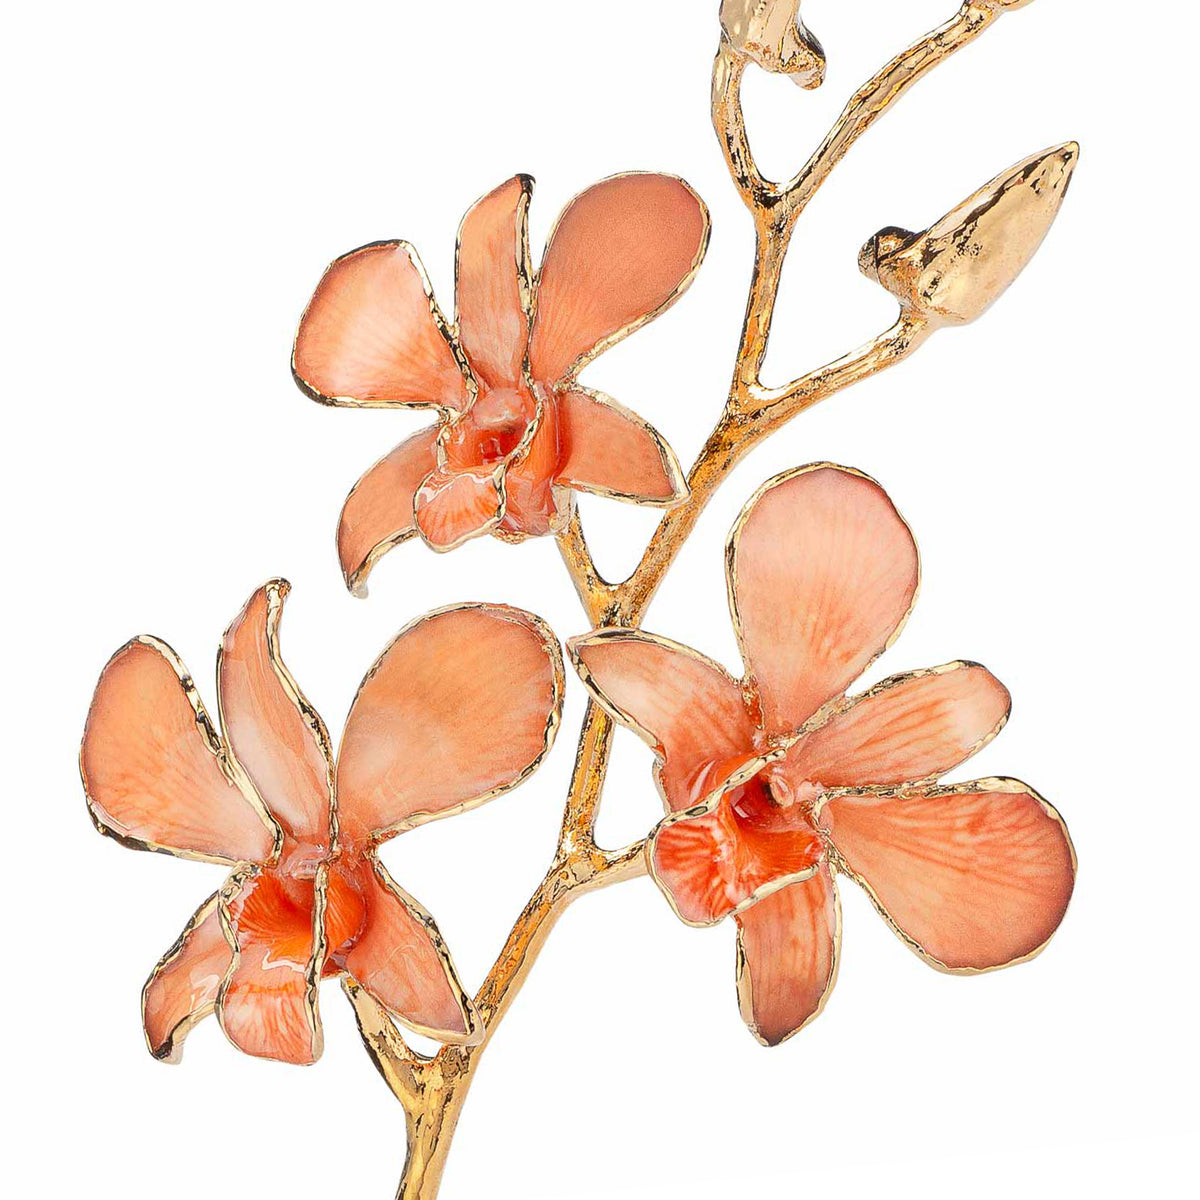 24K Gold Dipped Orchid in Peach view of gold stem and flowers closeup view